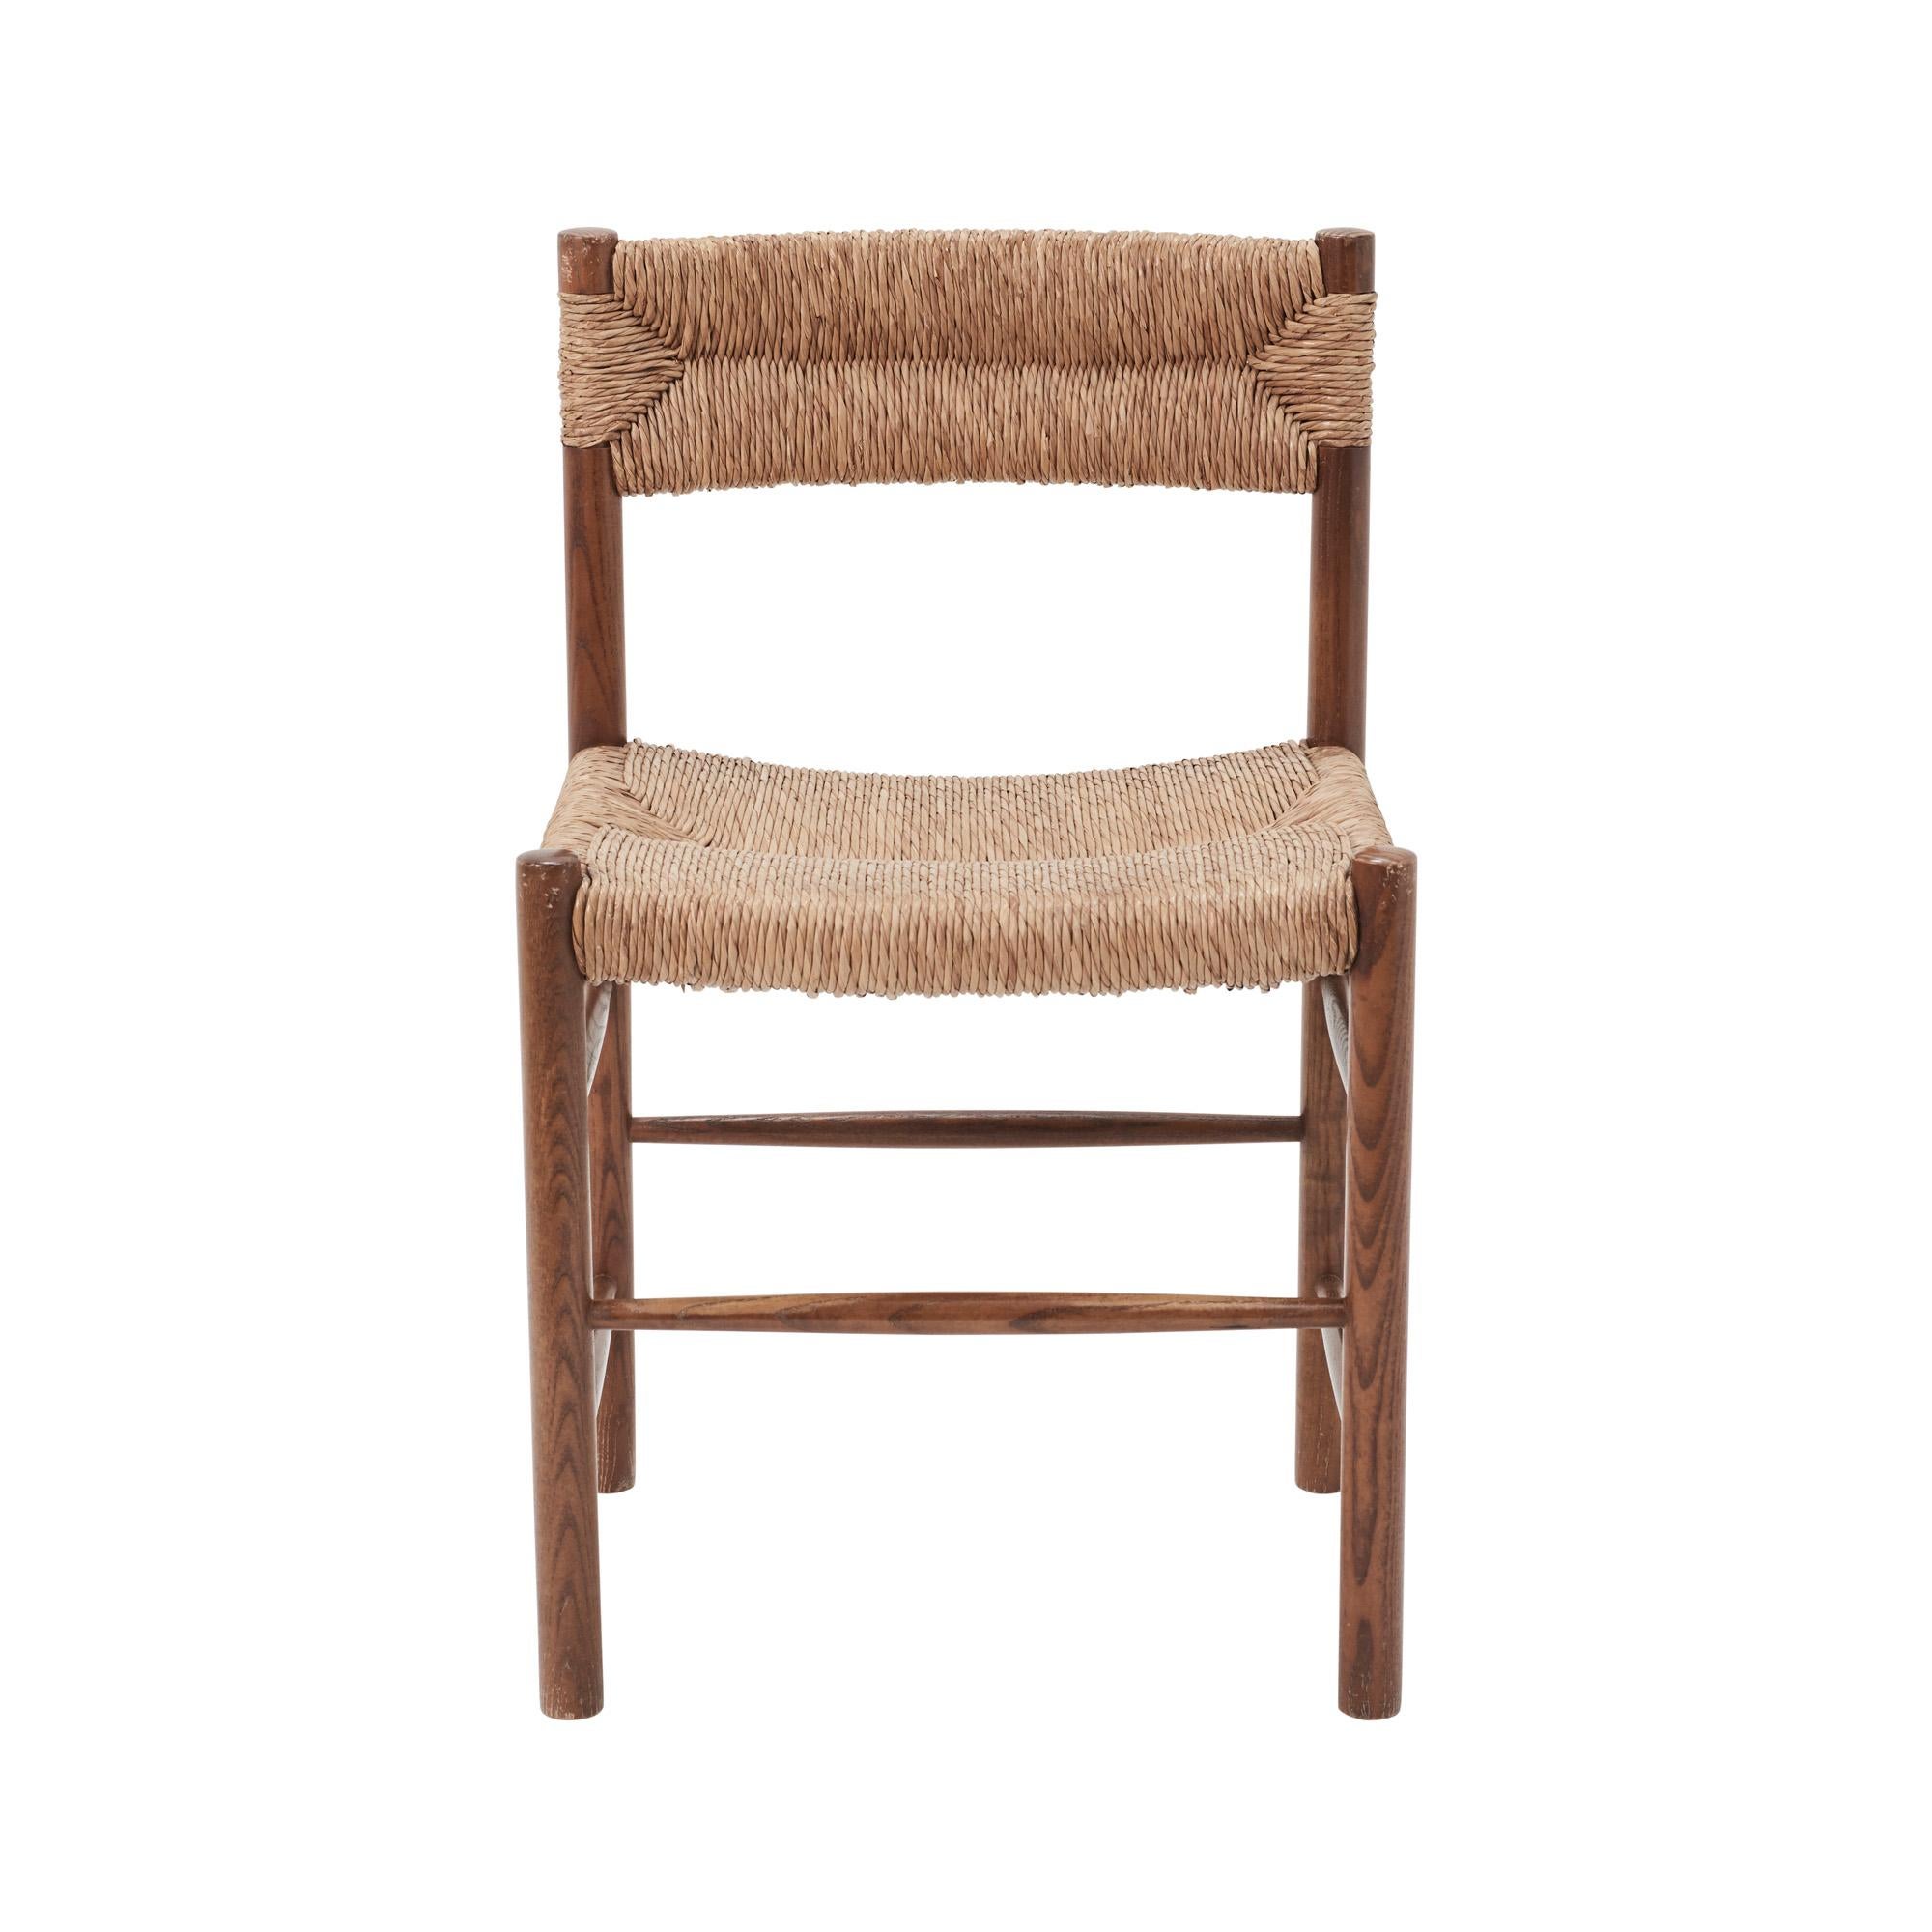 This Mid-Century Modern “Dordogne” chair by Charlotte Perriand for Robert Sentou, c. 1950 features a wood frame wrapped in straw. 

Since Schumacher was founded in 1889, our family-owned company has been synonymous with style, taste, and